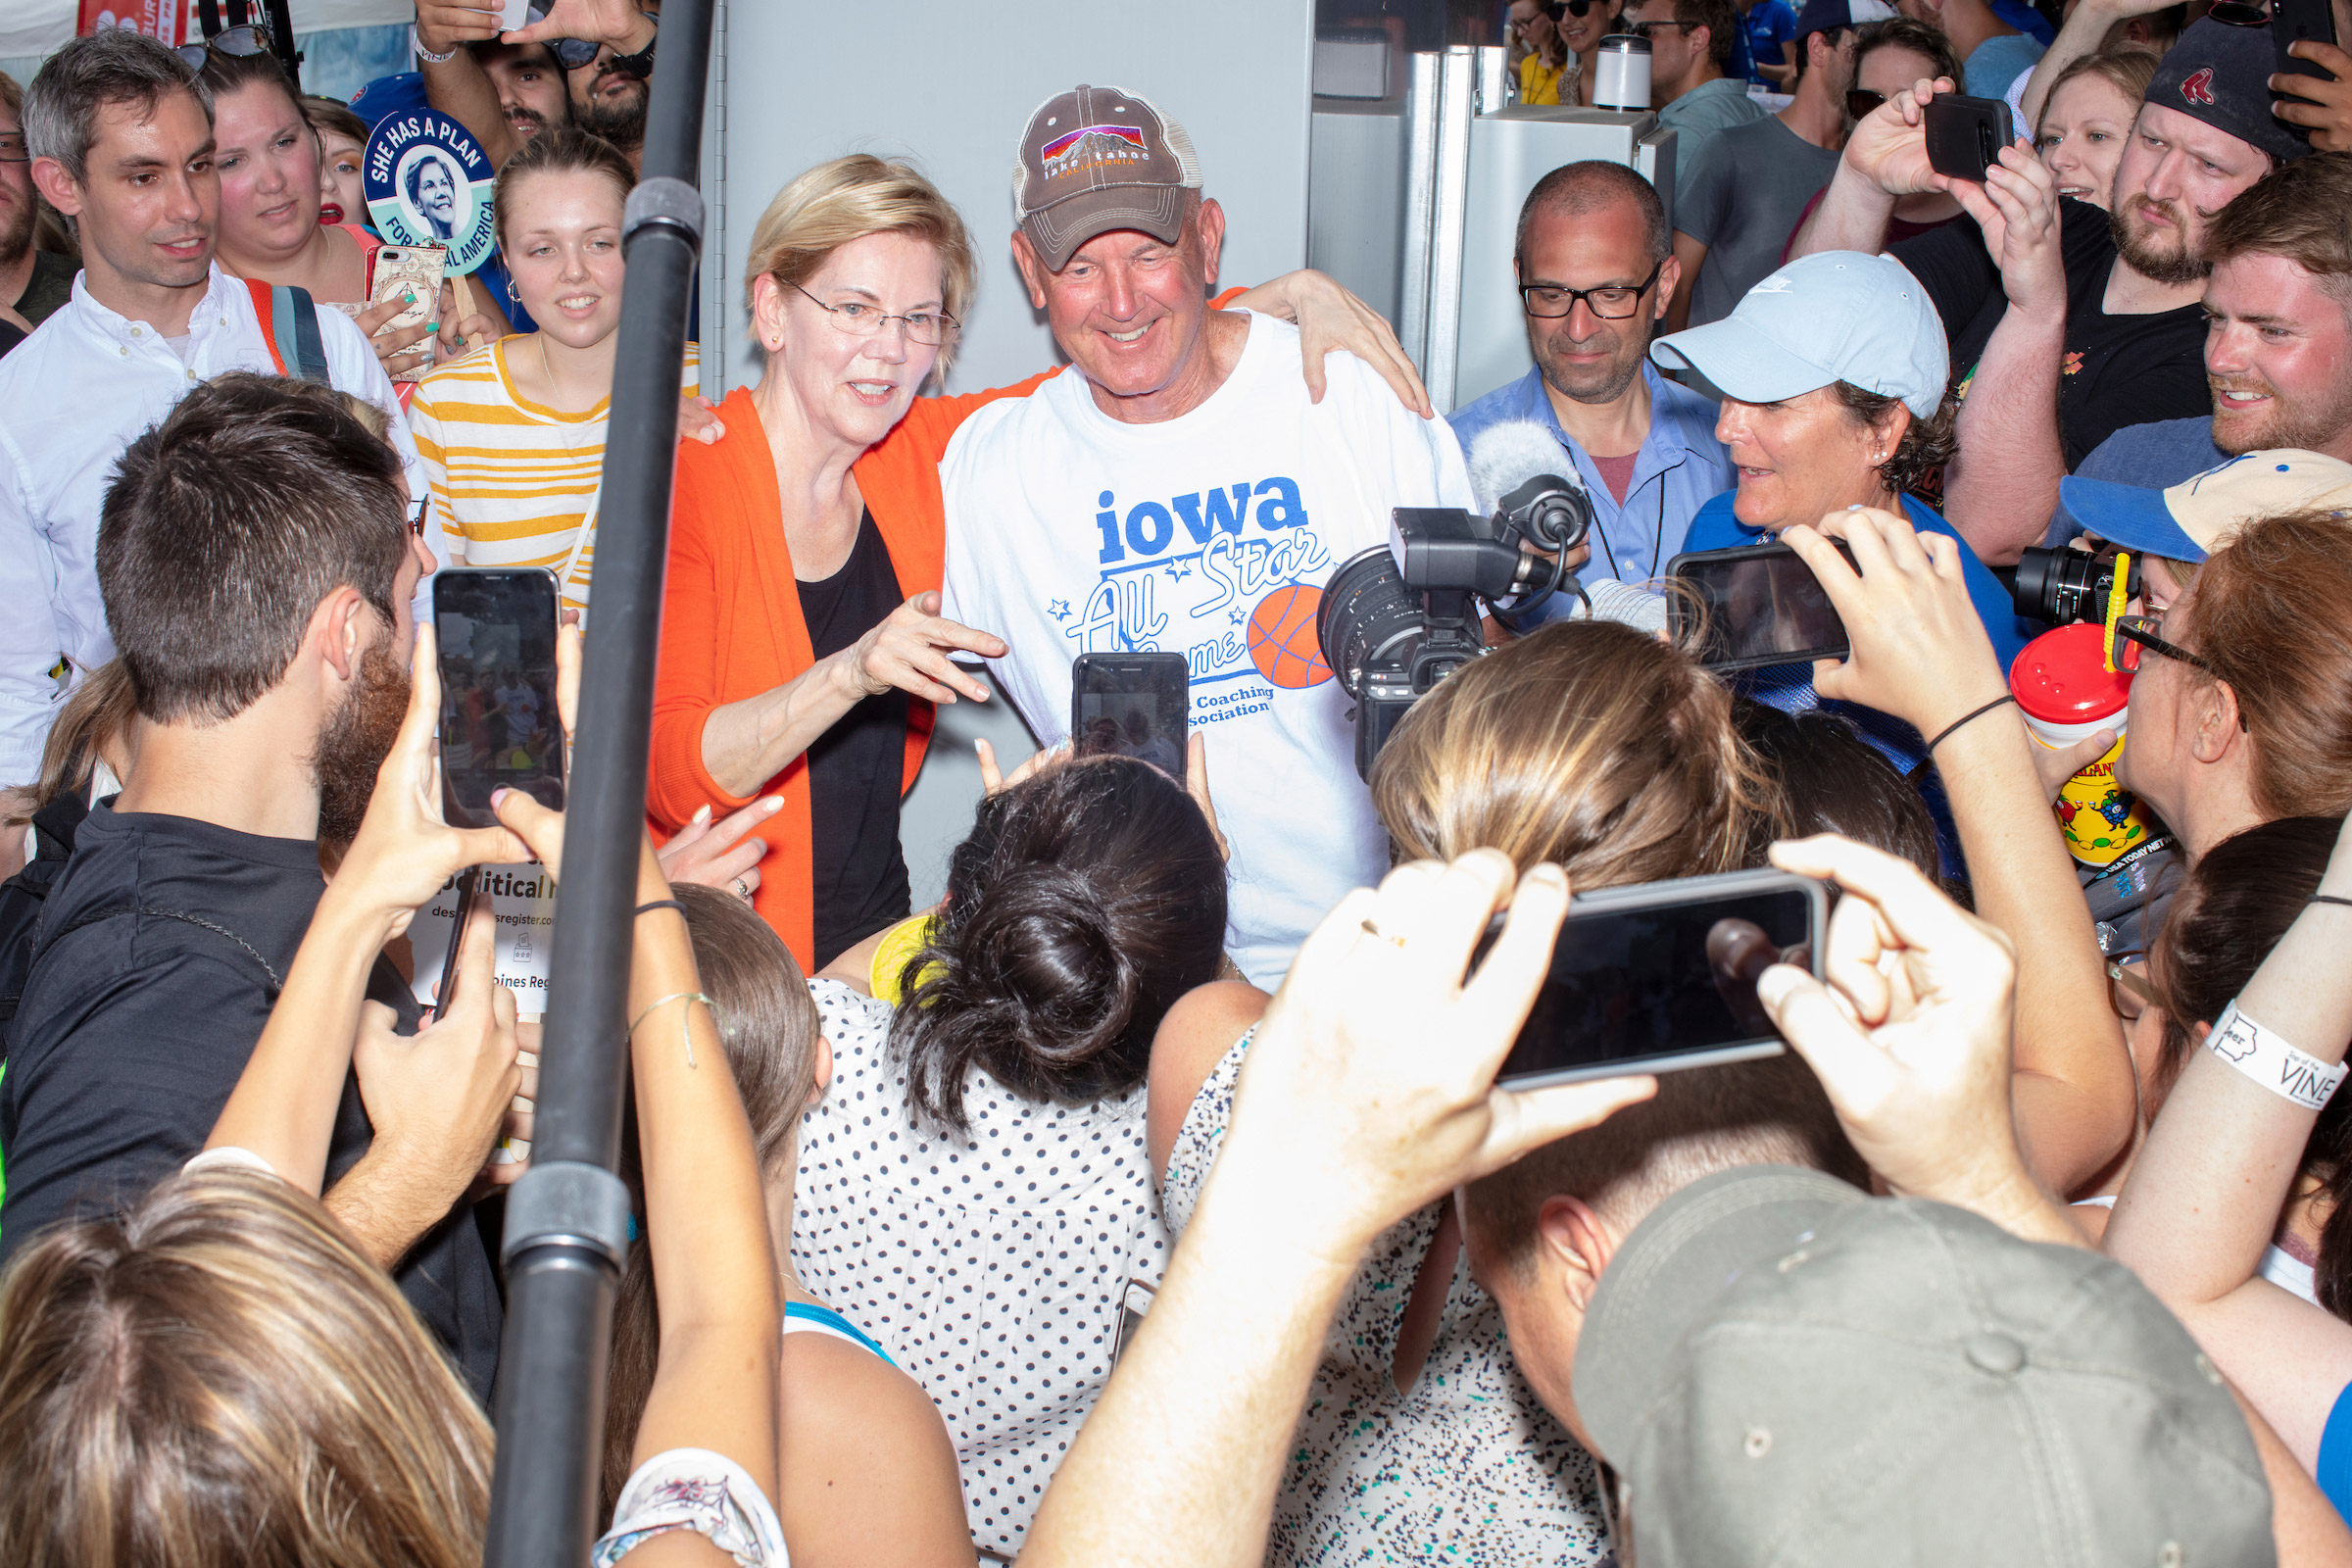 Elizabeth Warren poses for selfies after speaking at the Political Soapbox on Aug. 10. (M. Scott Brauer for TIME)